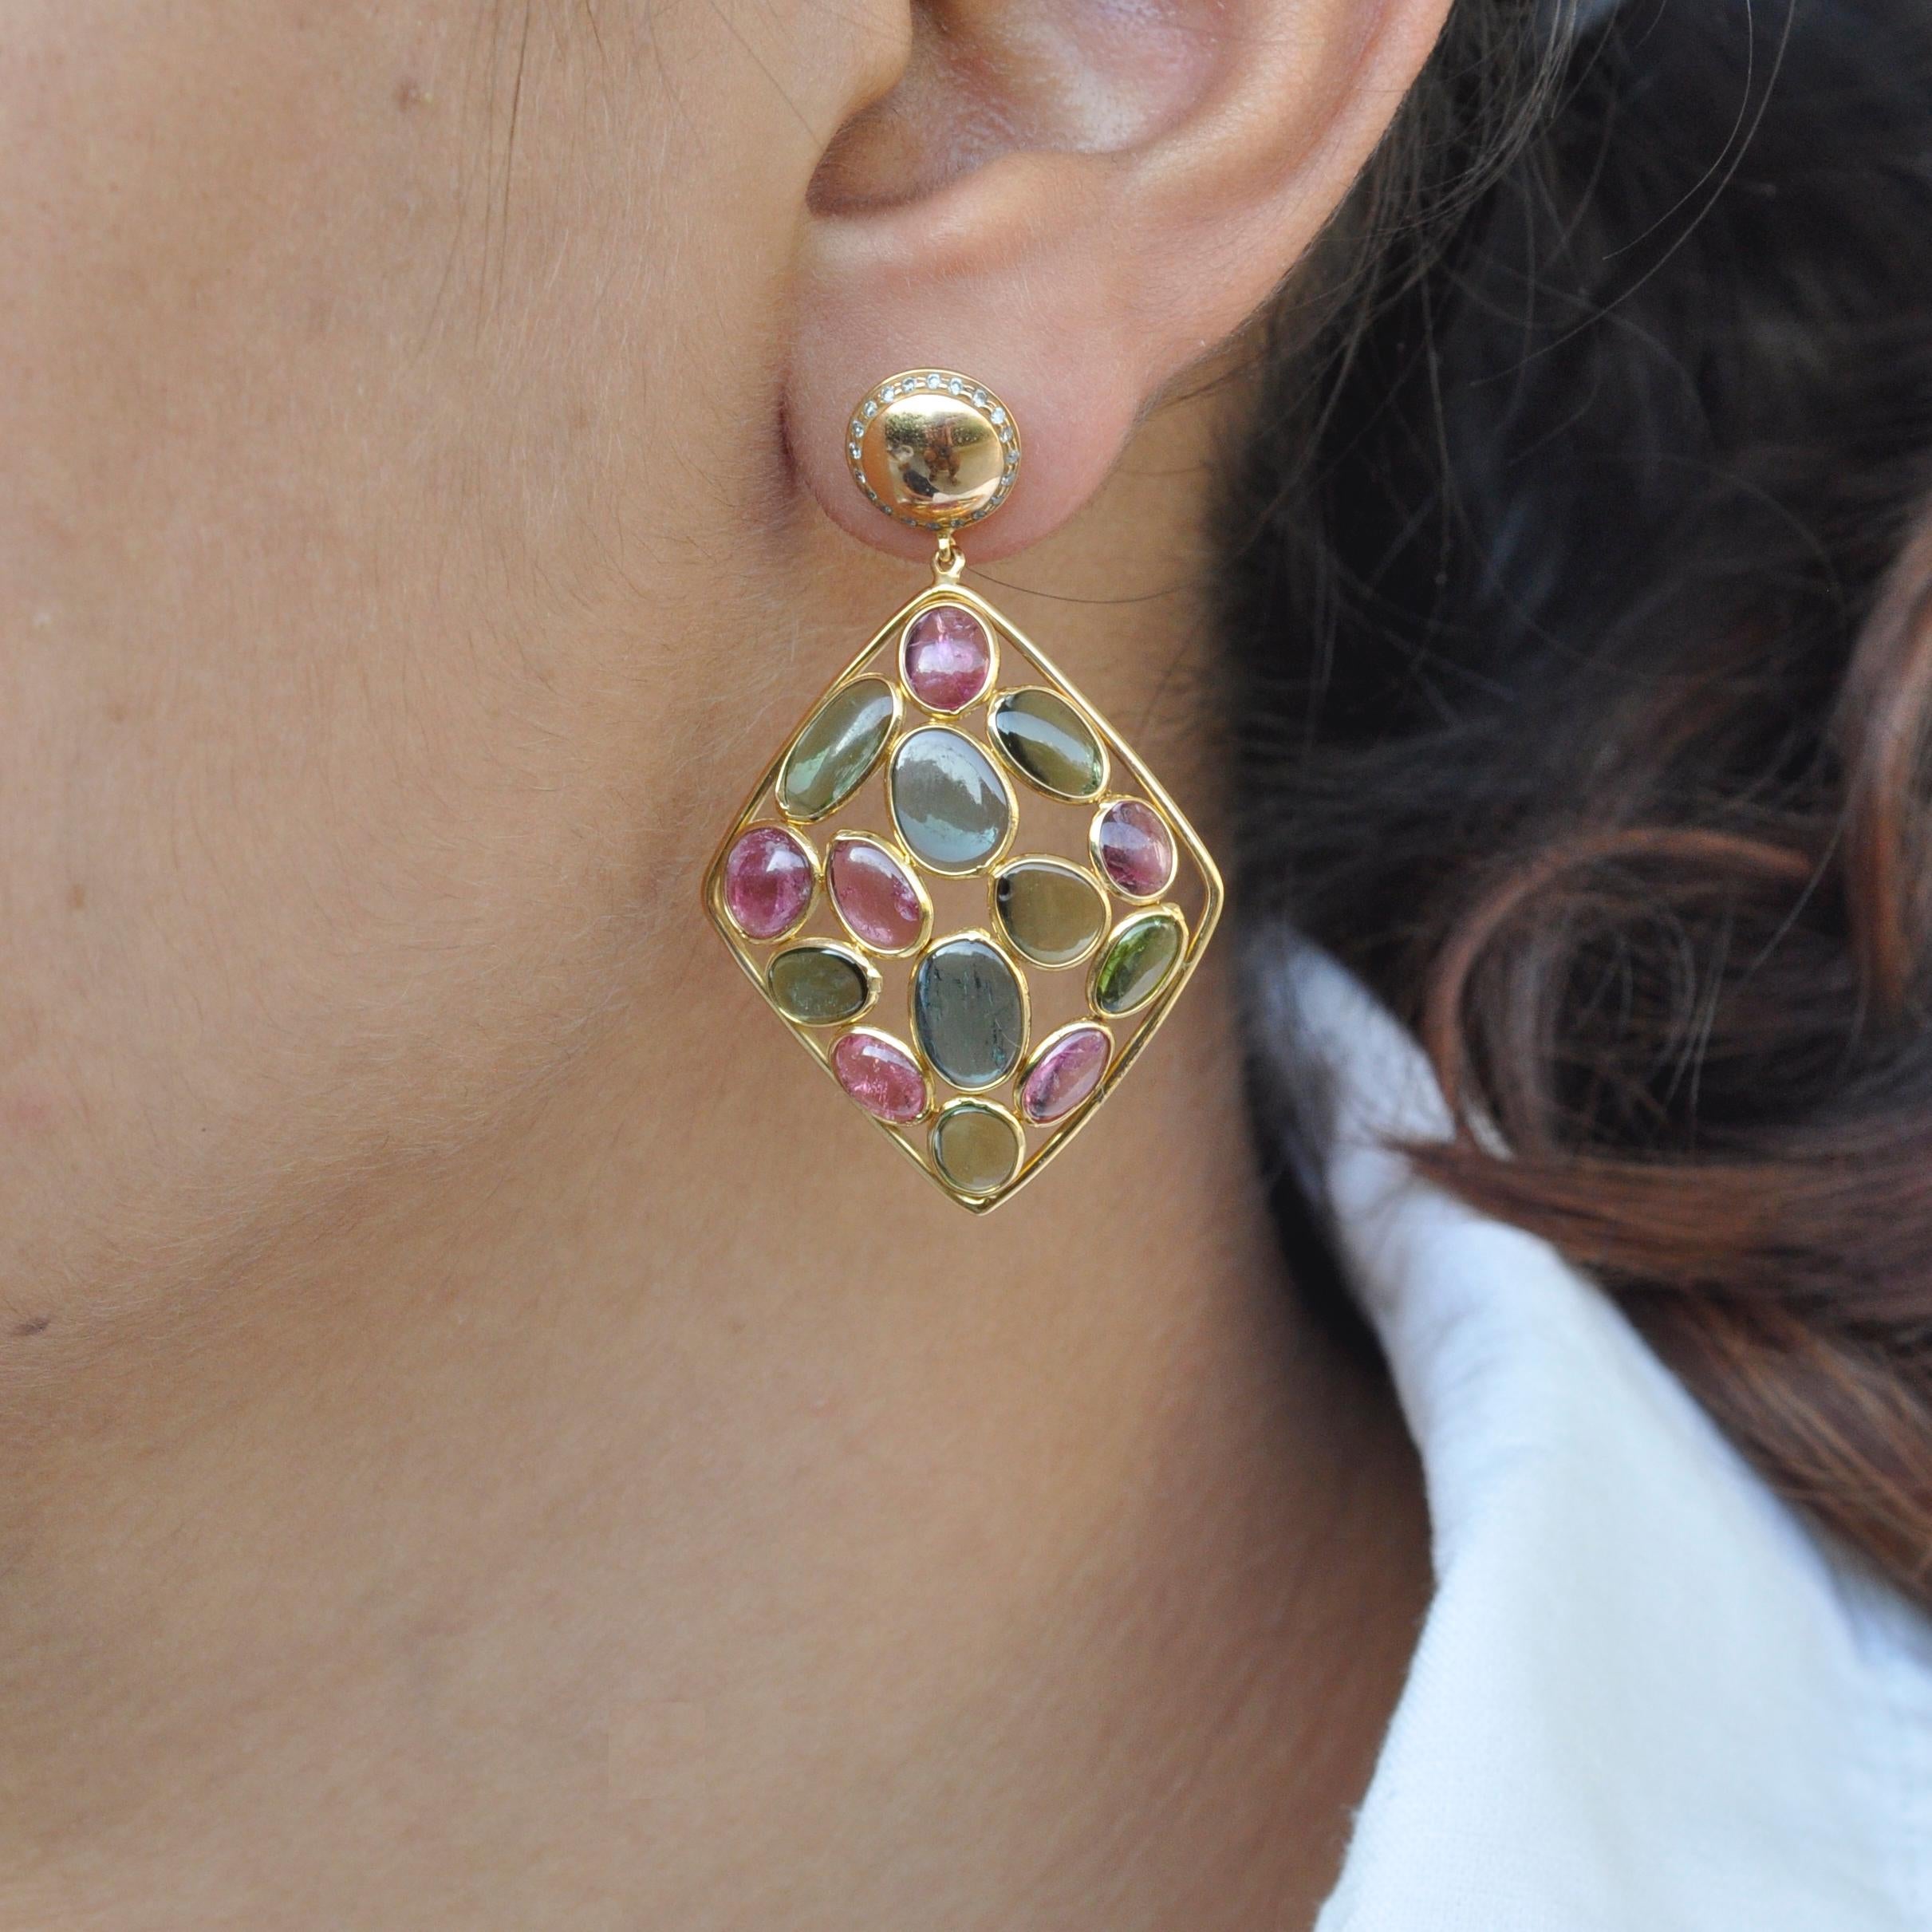 Celebrate colors.... Don't keep these earrings in your locker box - these are meant to be worn!!! These colorful earrings are 18ky with multi-color tourmaline gemstones. The gemstones include Pink Tourmaline, Green Tourmaline and Blue Tourmaline.